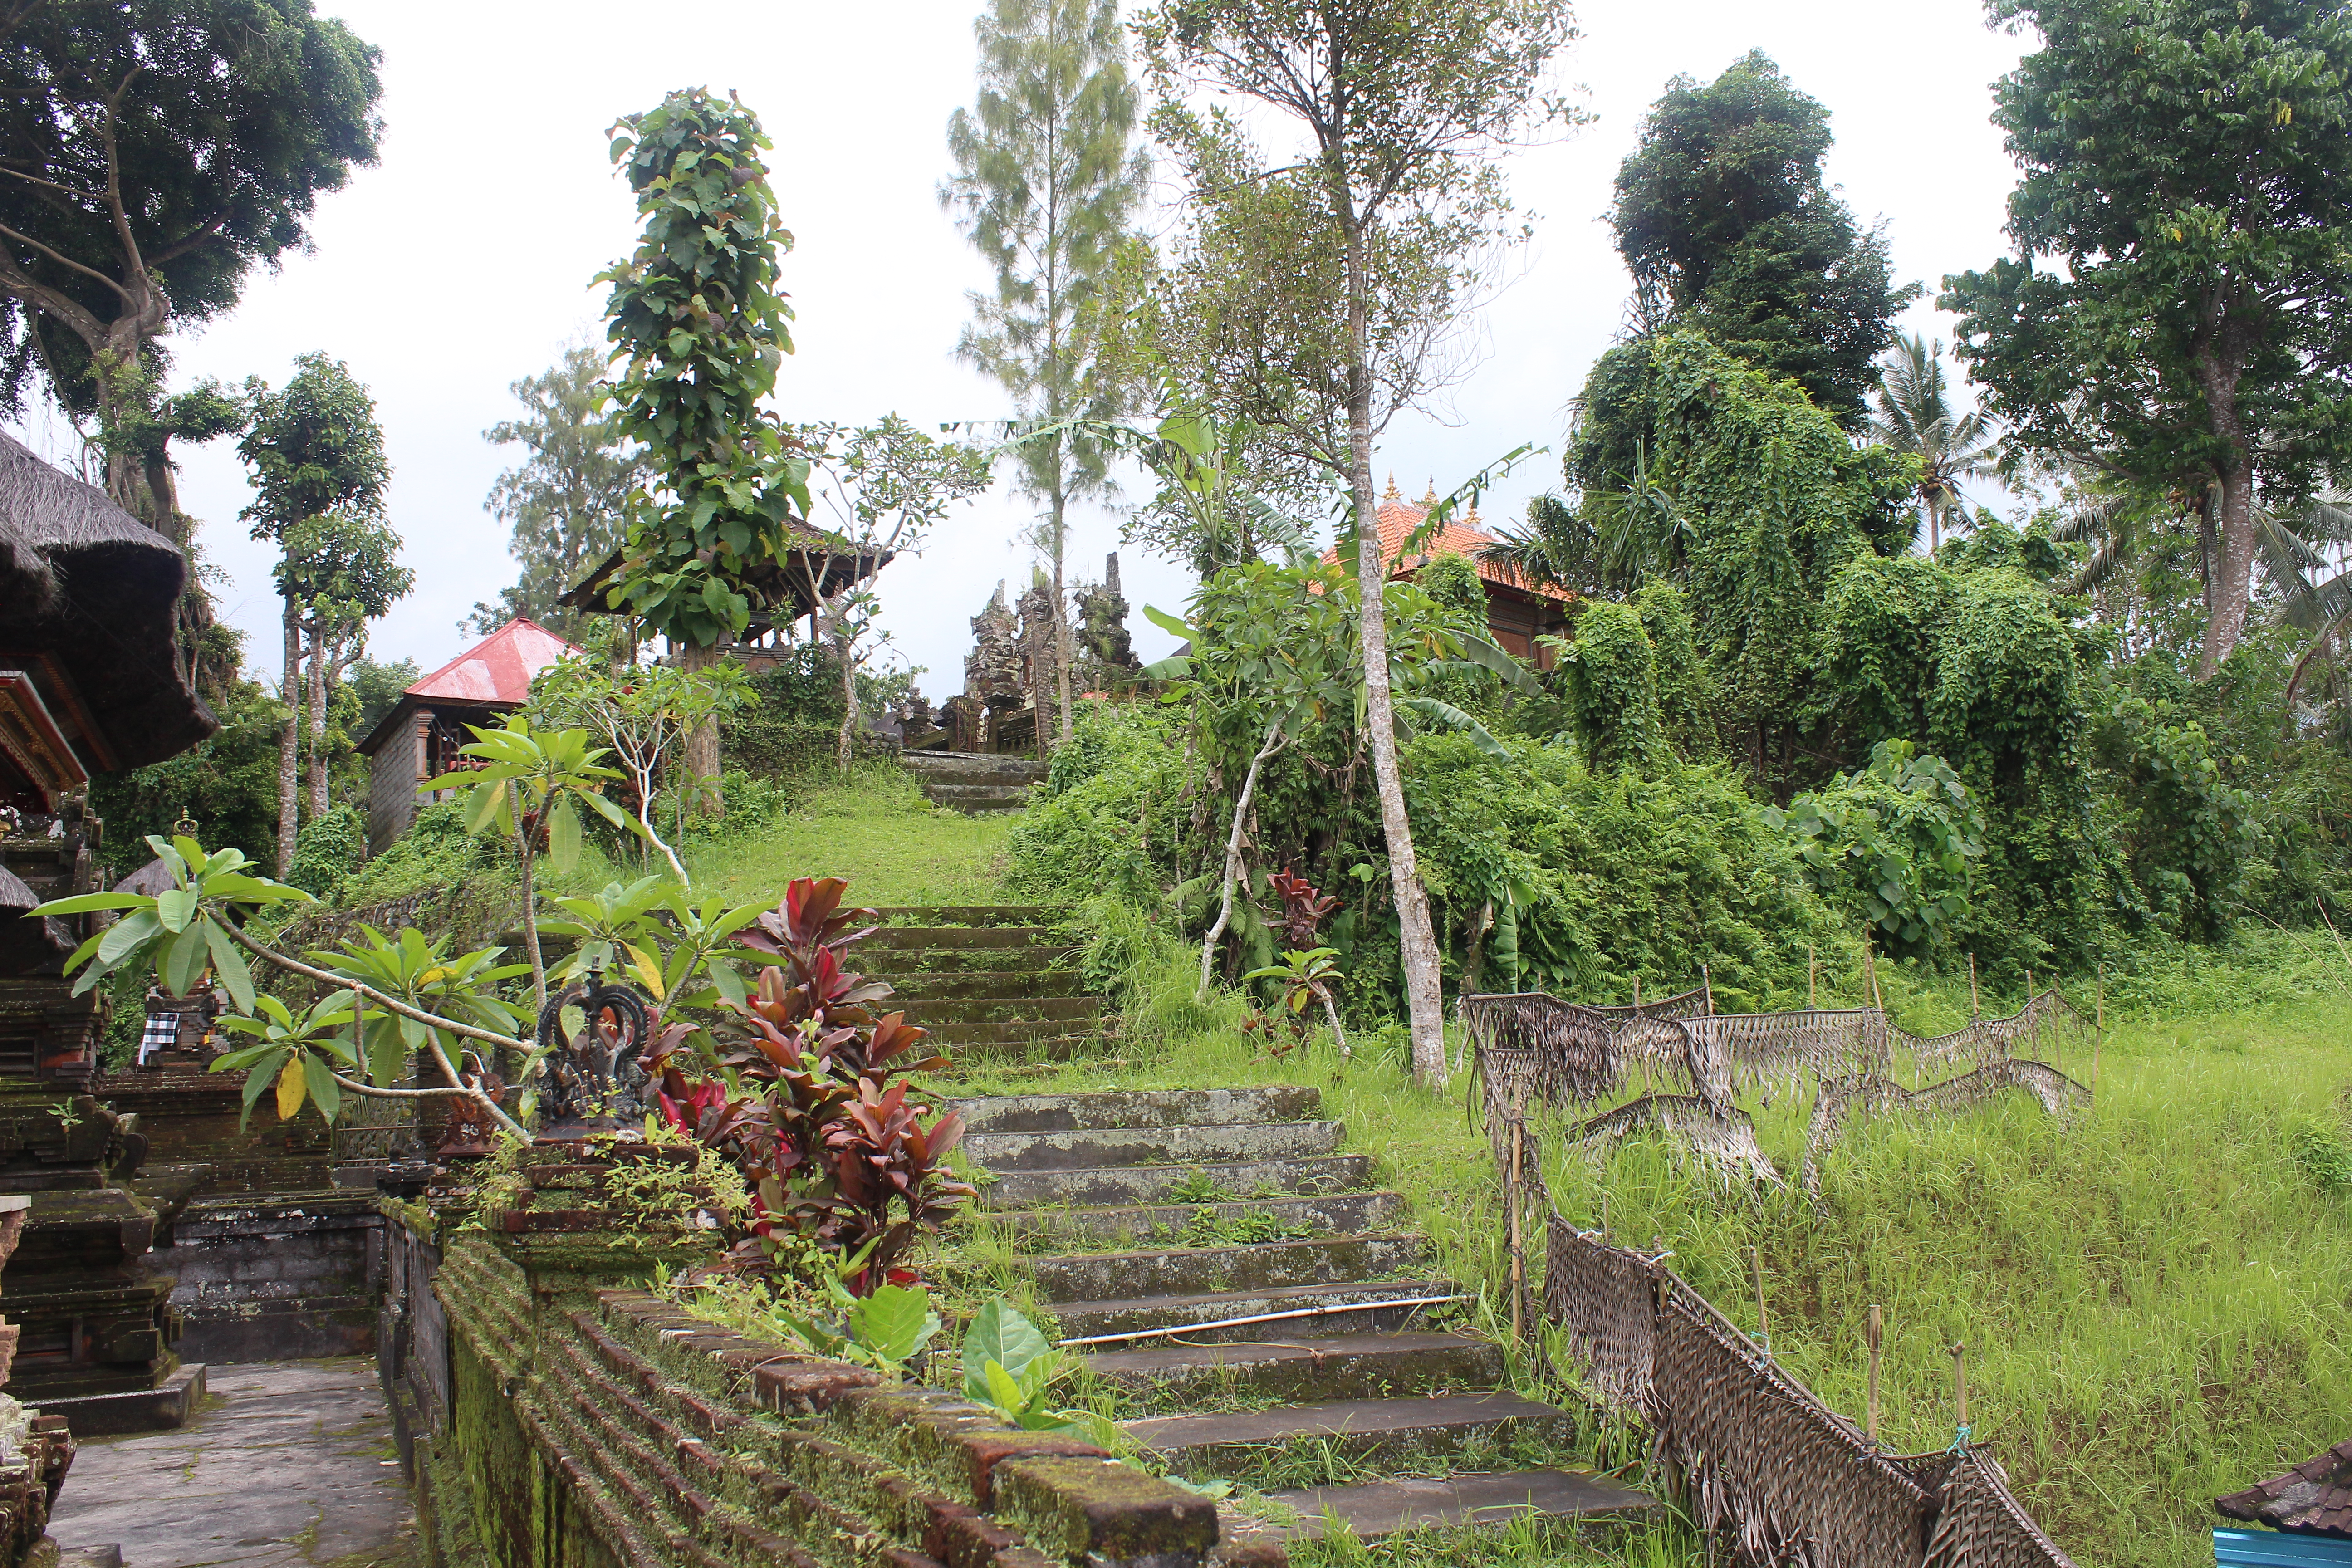 Stairs leading up to temple complex